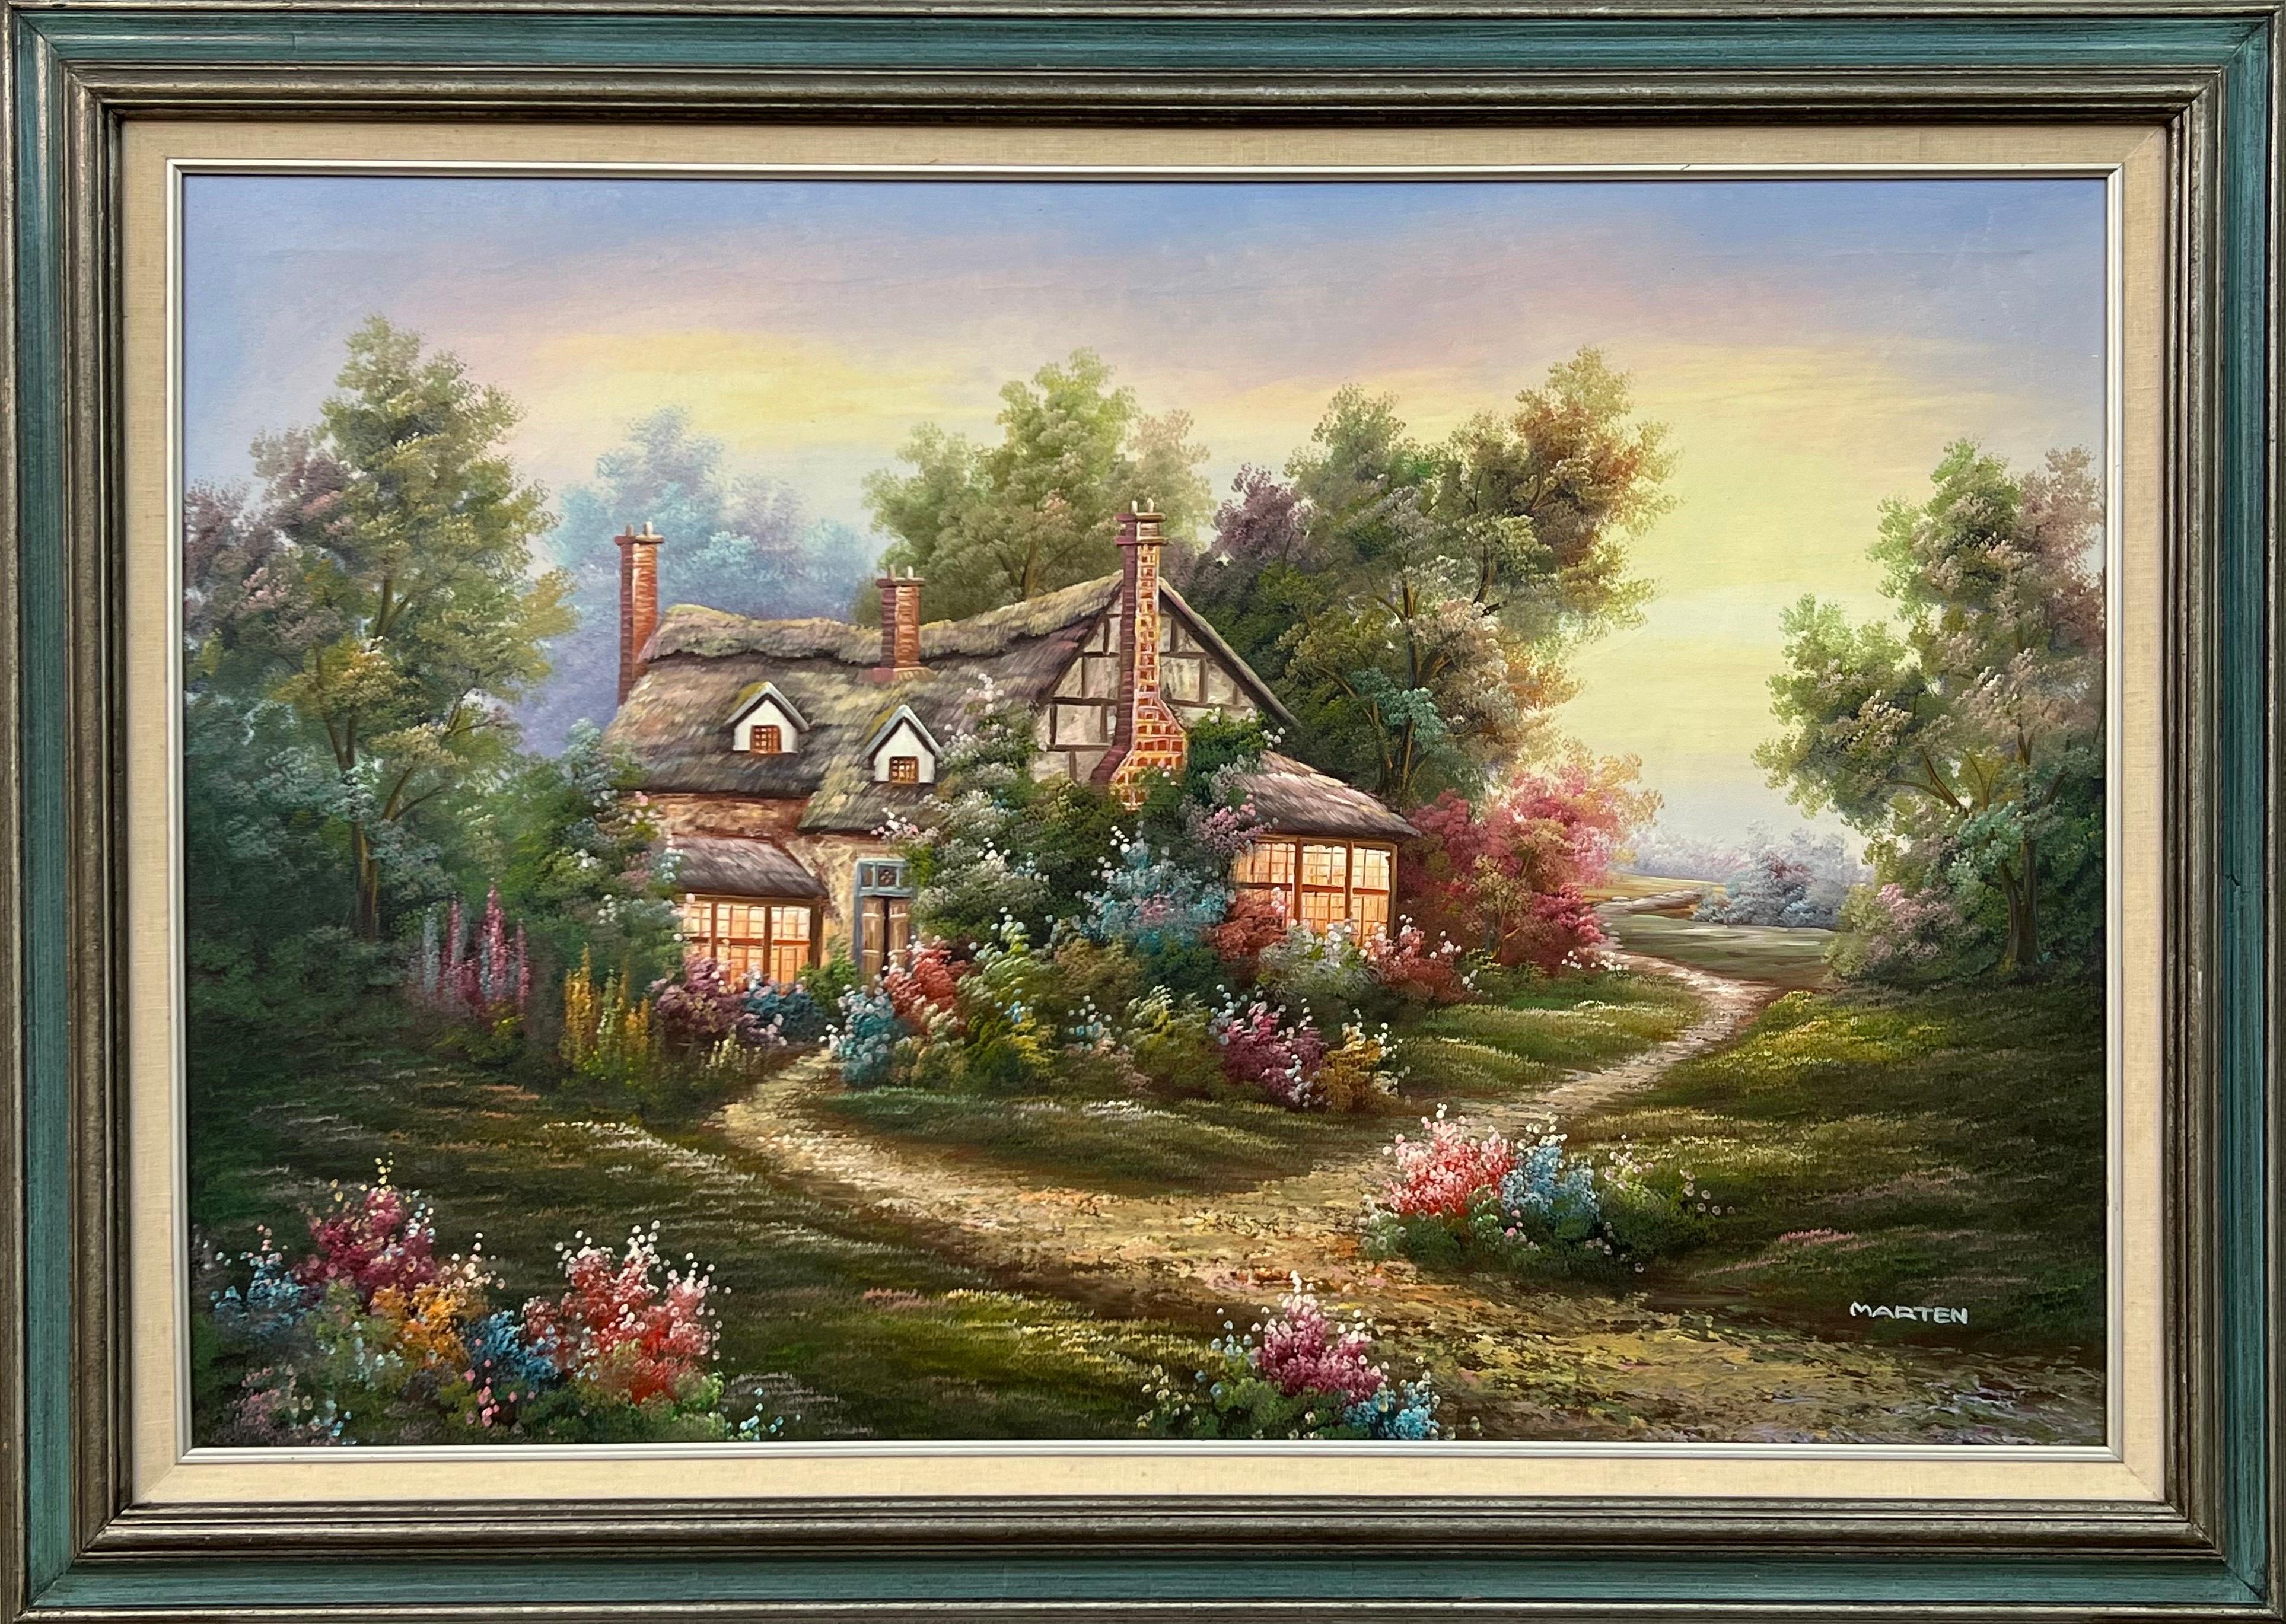 Vintage Oil Painting of Fantasy Cottage in the Woods with Flowers & Gardens